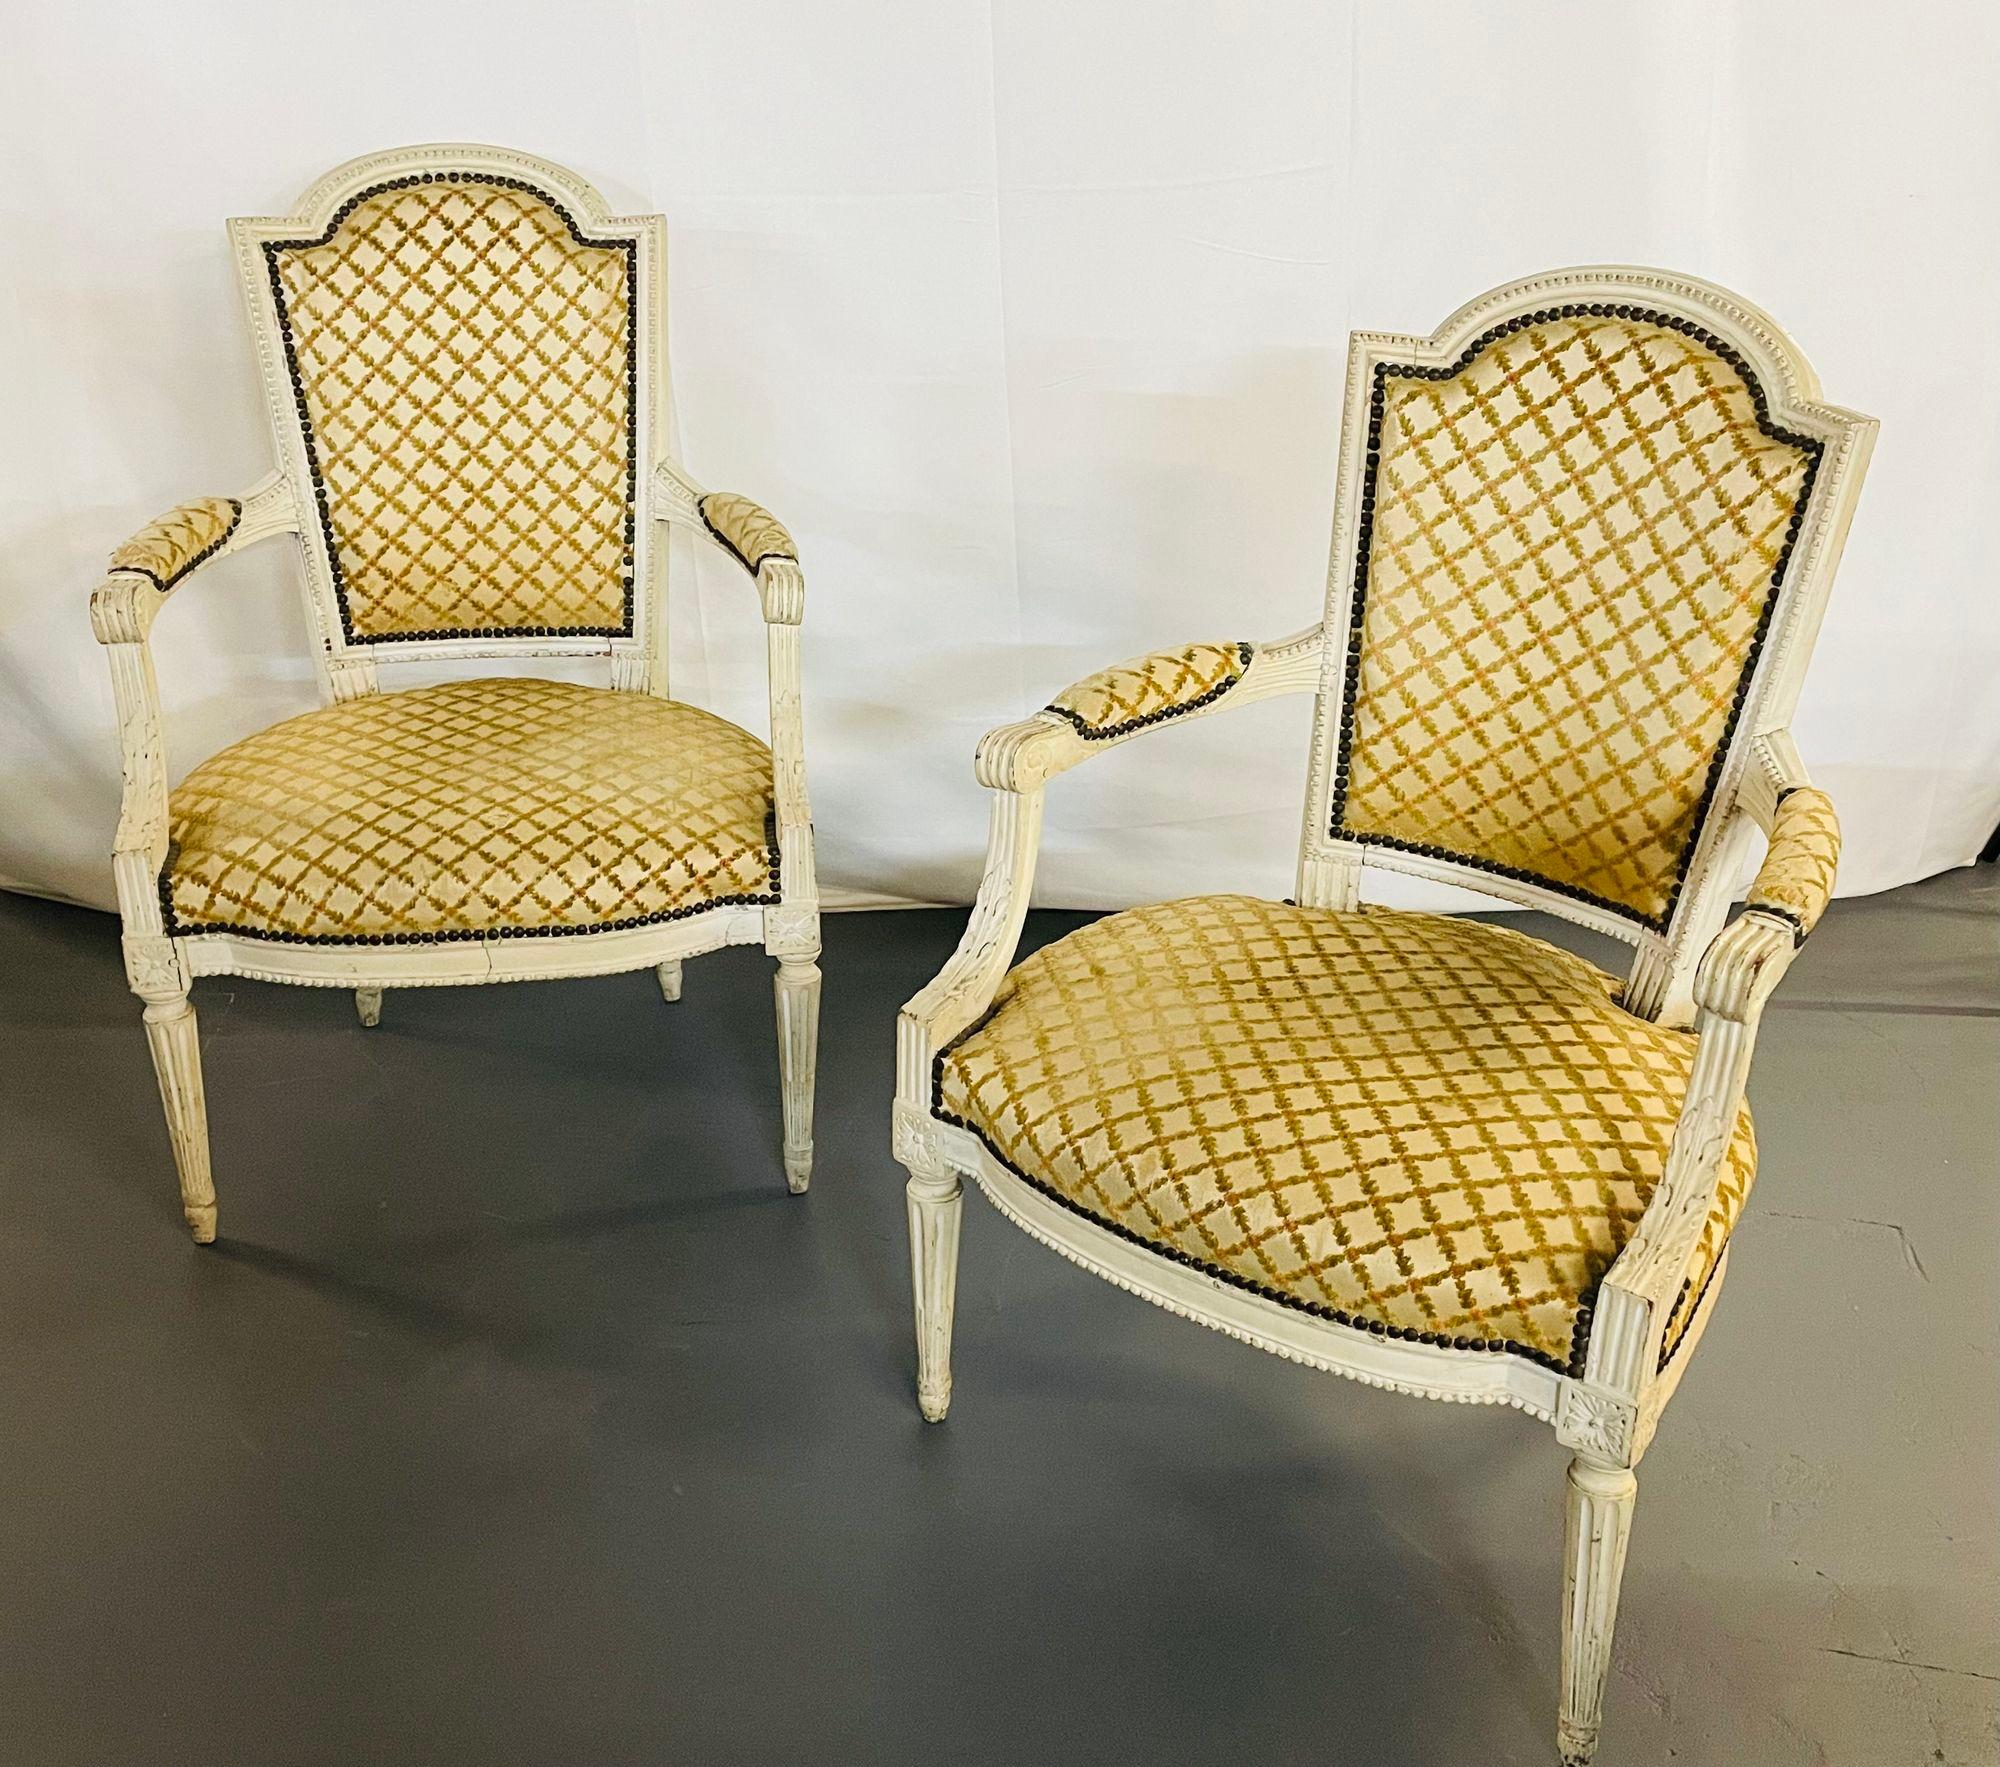 Late 19th Century Pair of French Louis XIV Style Armchairs, Fauteuils, Maison Jansen Style, Pegged